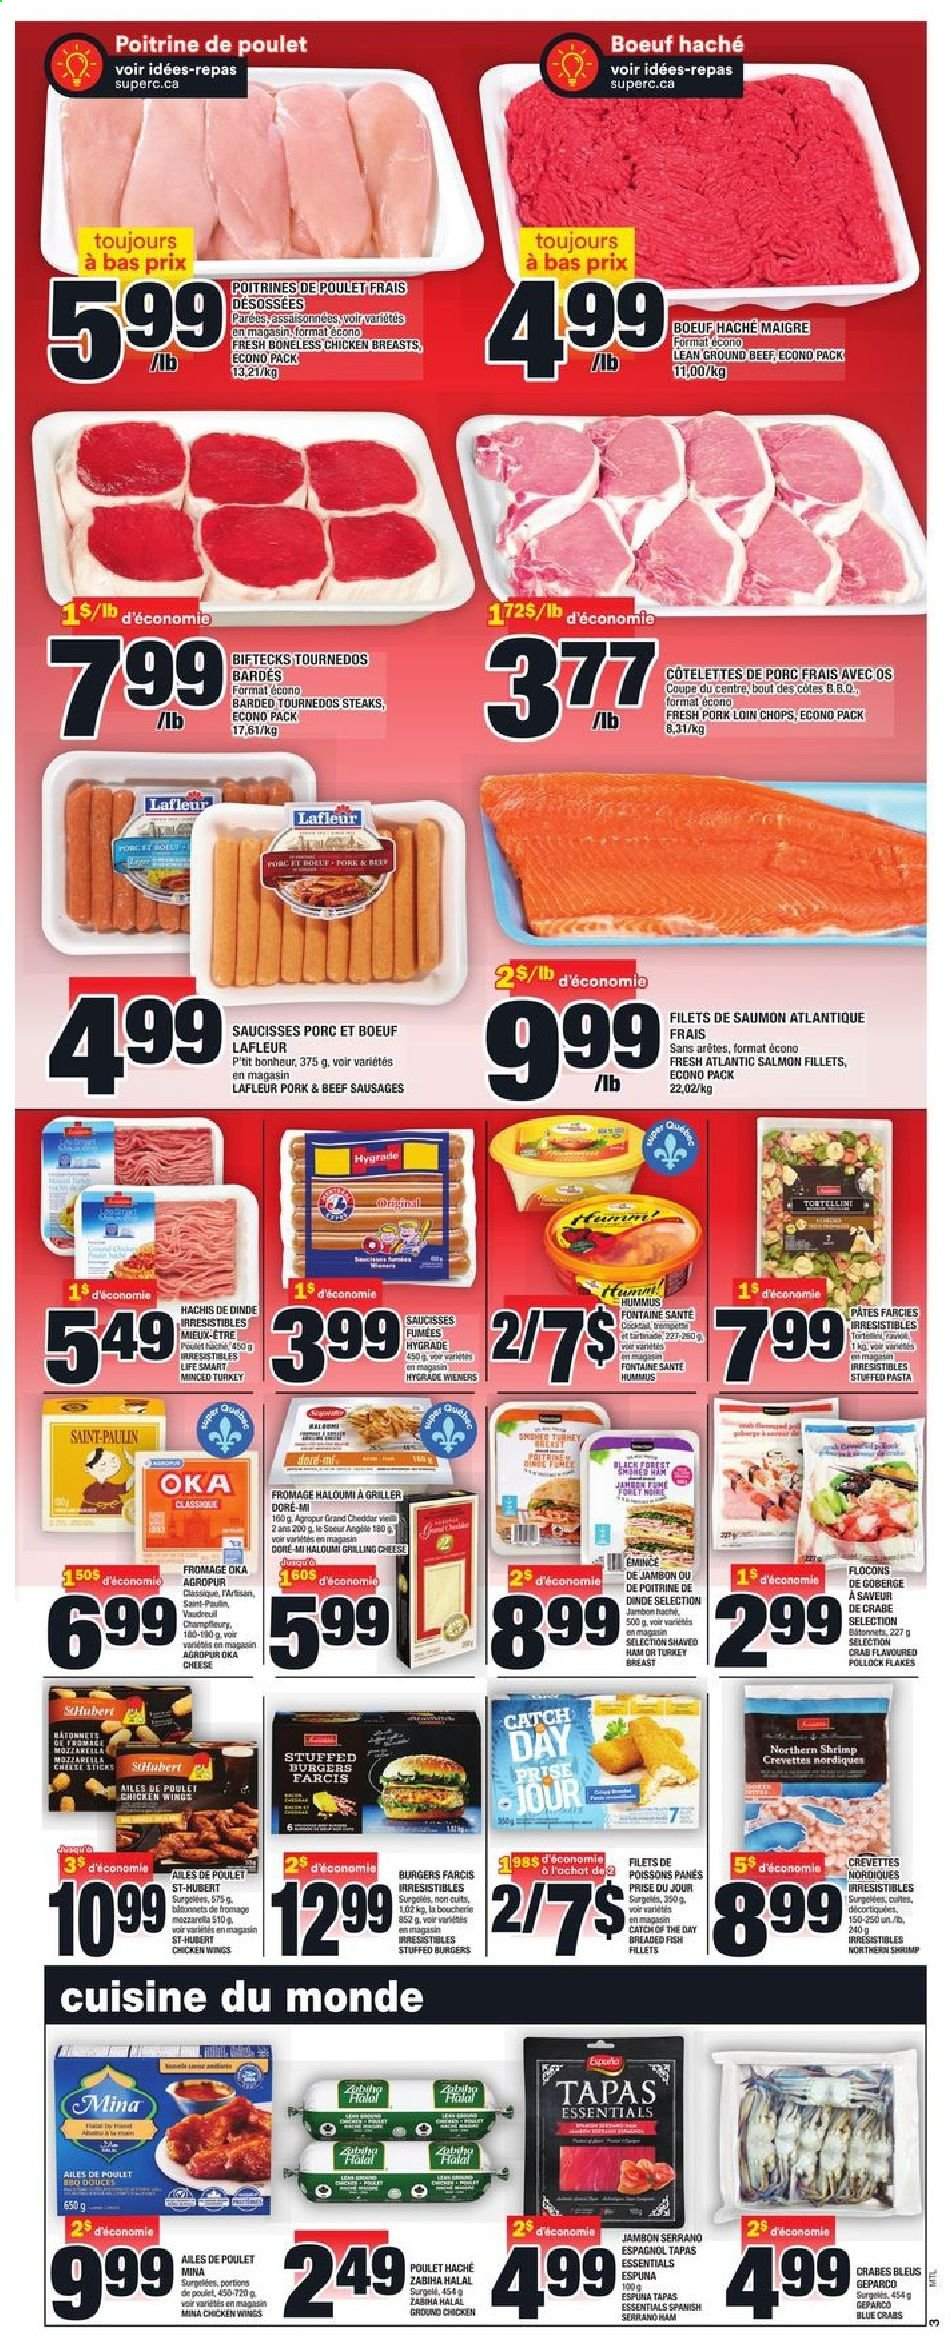 thumbnail - Super C Flyer - May 27, 2021 - June 02, 2021 - Sales products - salmon, salmon fillet, pollock, crab, fish, shrimps, hamburger, pasta, breaded fish, ham, sausage, beef sausage, hummus, cheddar, cheese, chicken wings, turkey breast, turkey, beef meat, ground beef, pork chops, pork loin, pork meat, steak. Page 5.